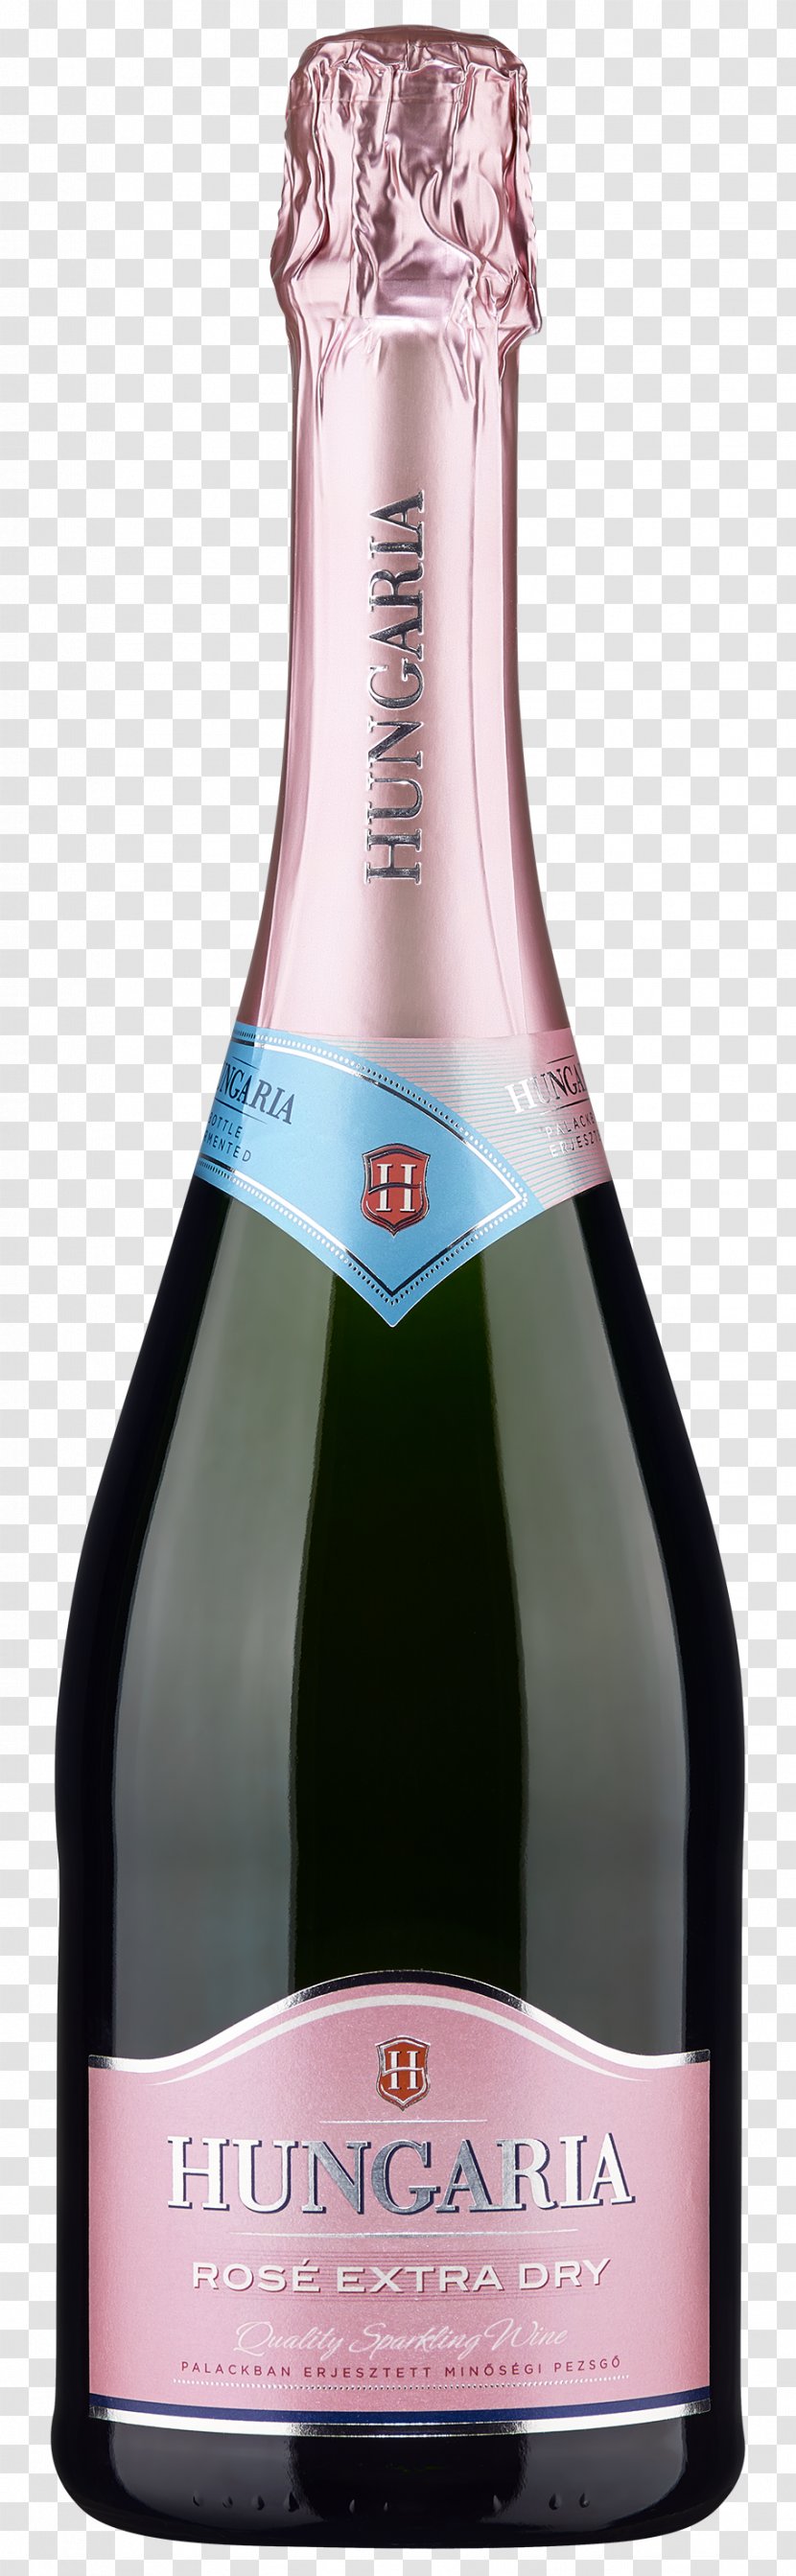 Champagne Sparkling Wine Rosé Hungary Transparent PNG